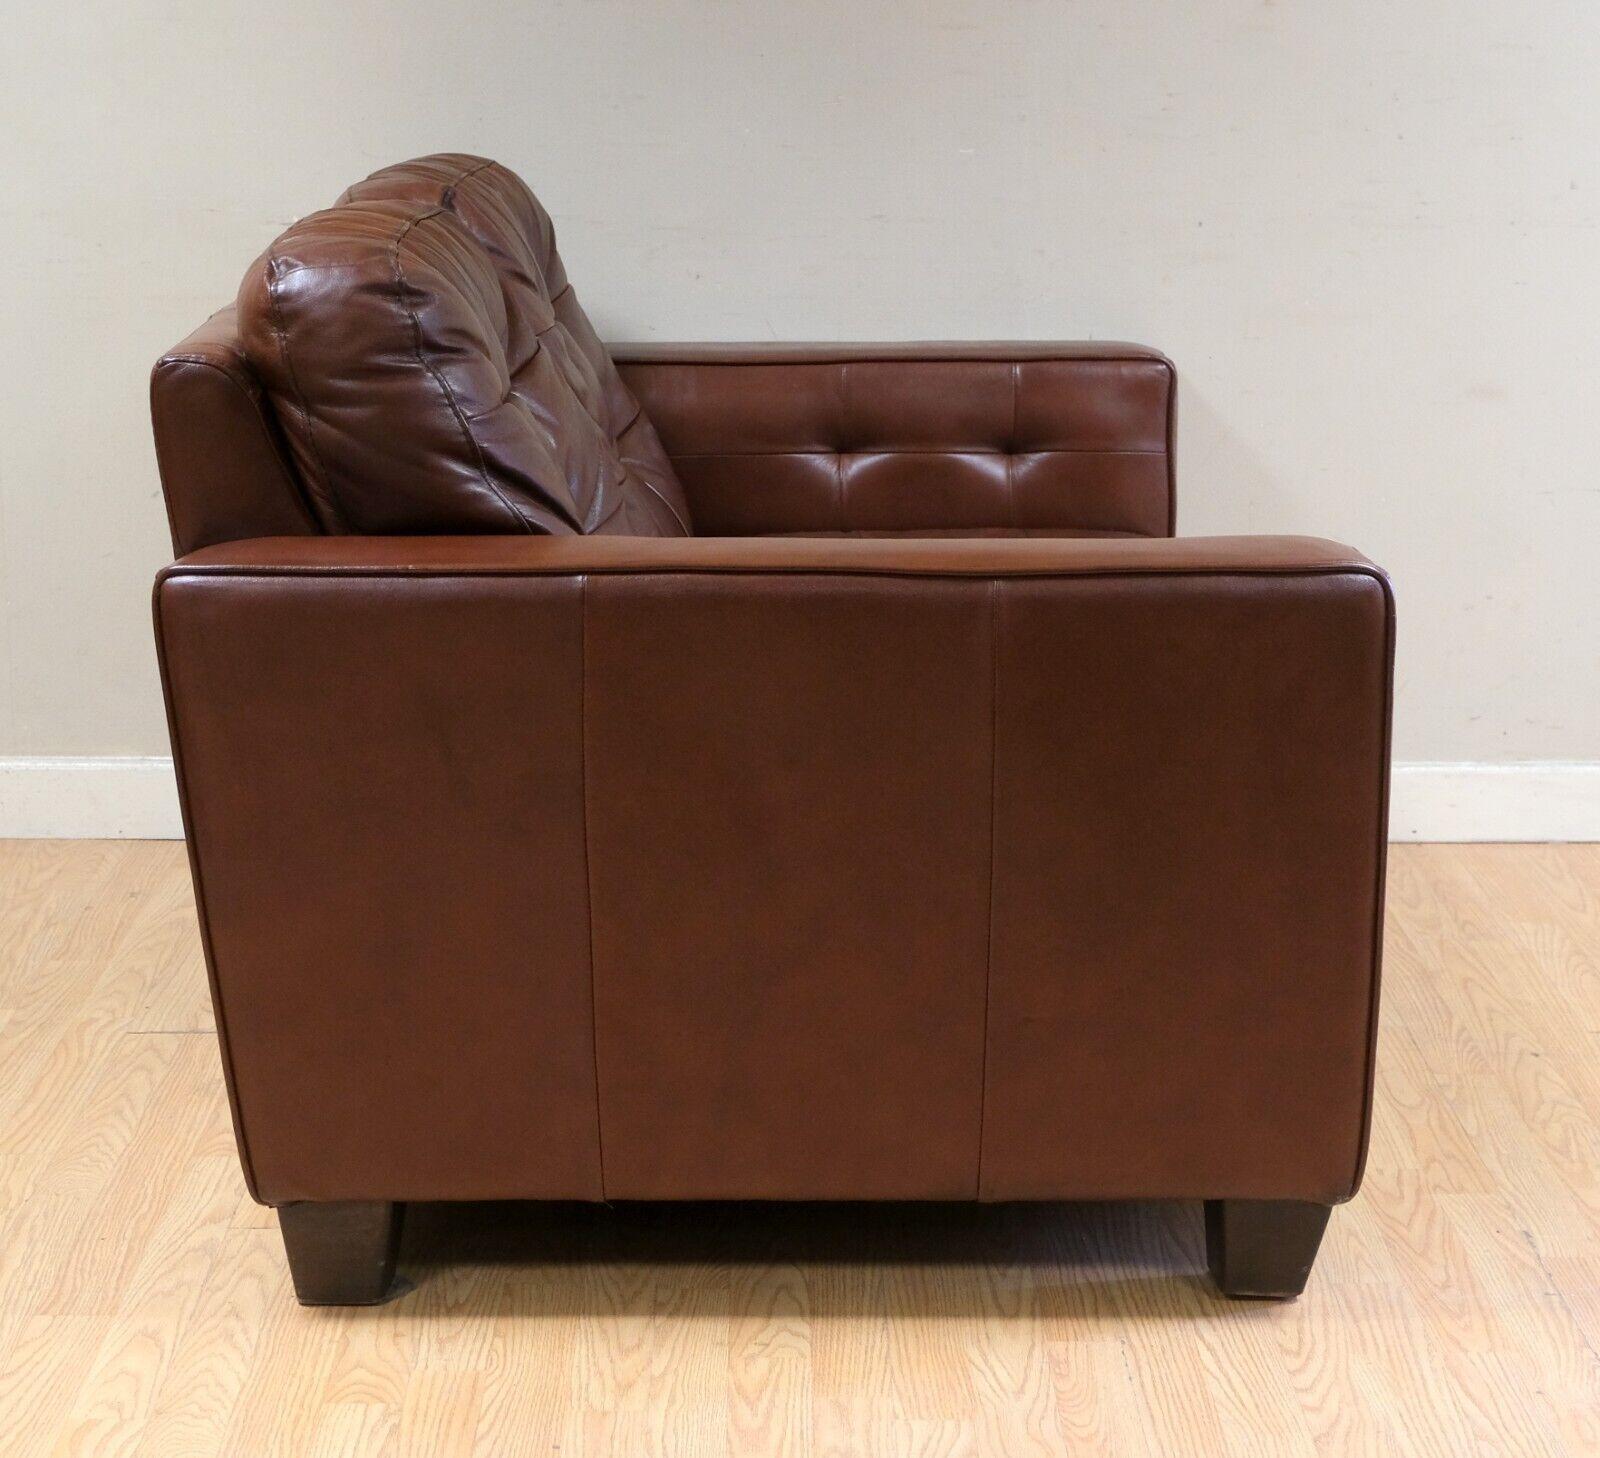 We are delighted to offer for sale this lovely Knoll style brown leather two seater sofa chesterfield style buttoning. 

This piece is good looking and super comfortable, everything compliments with the soft leather. The Knoll style makes it very